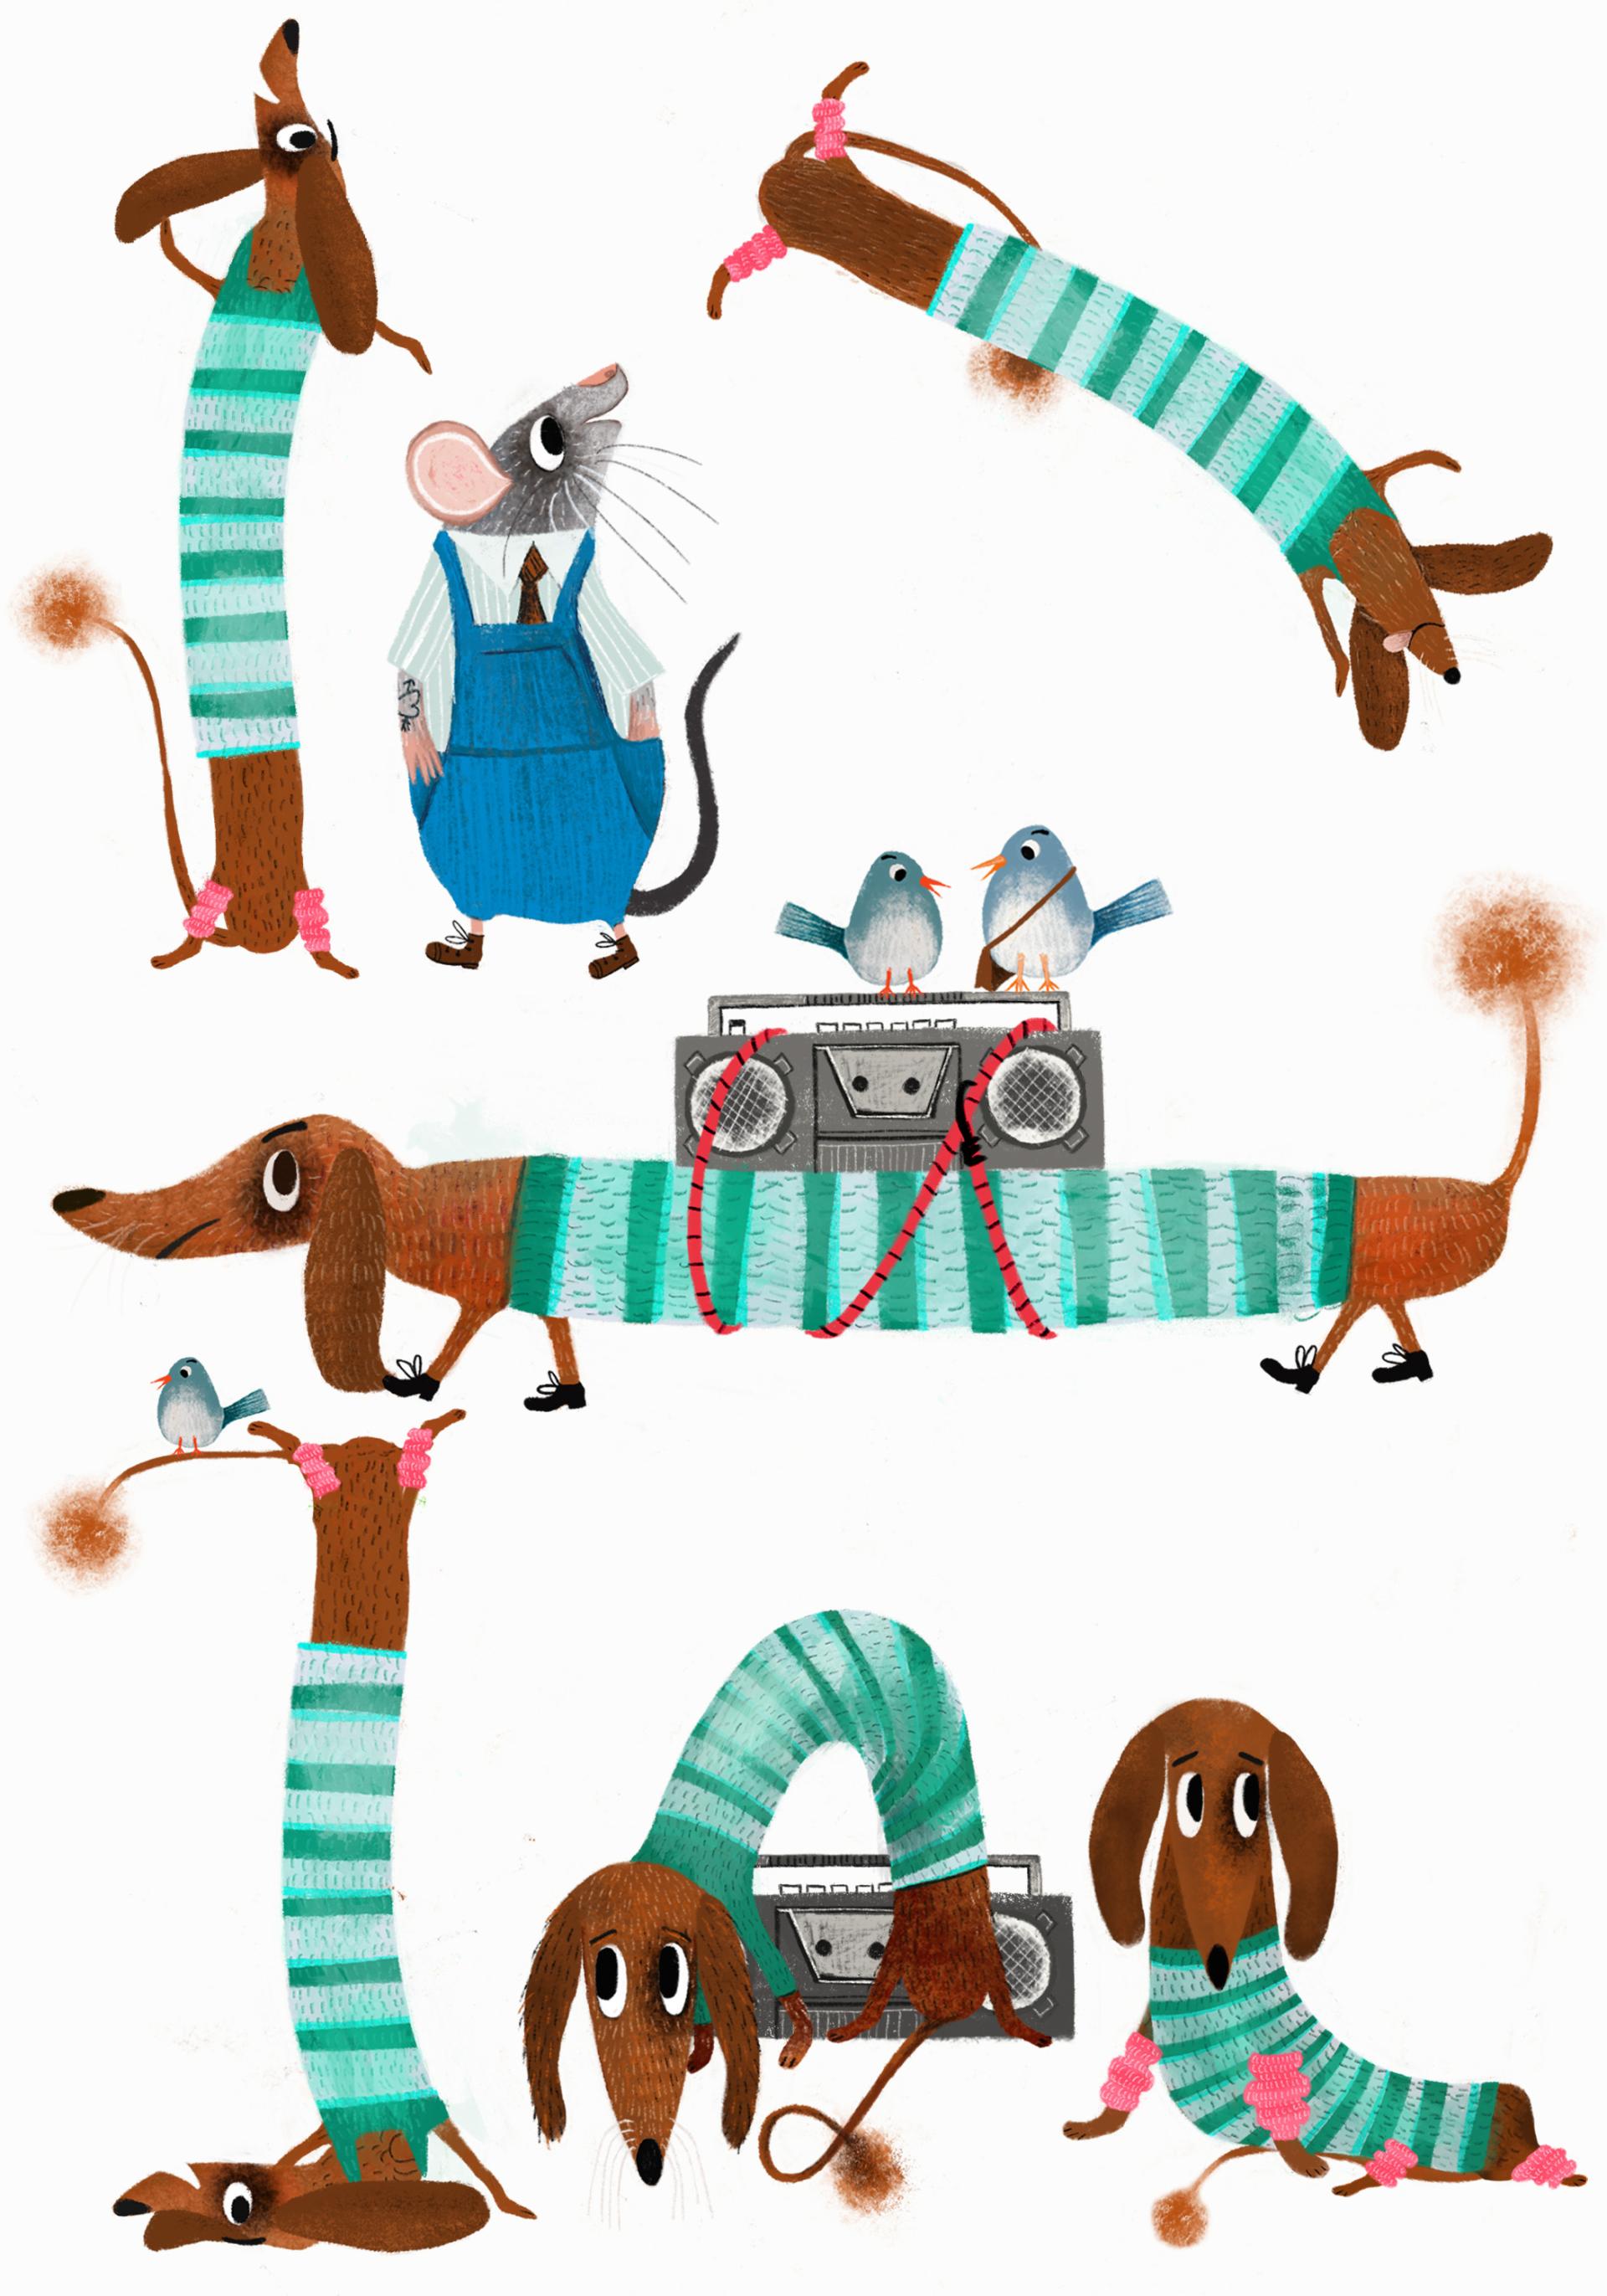 Ketchup the Sausage Dog and Other Animals